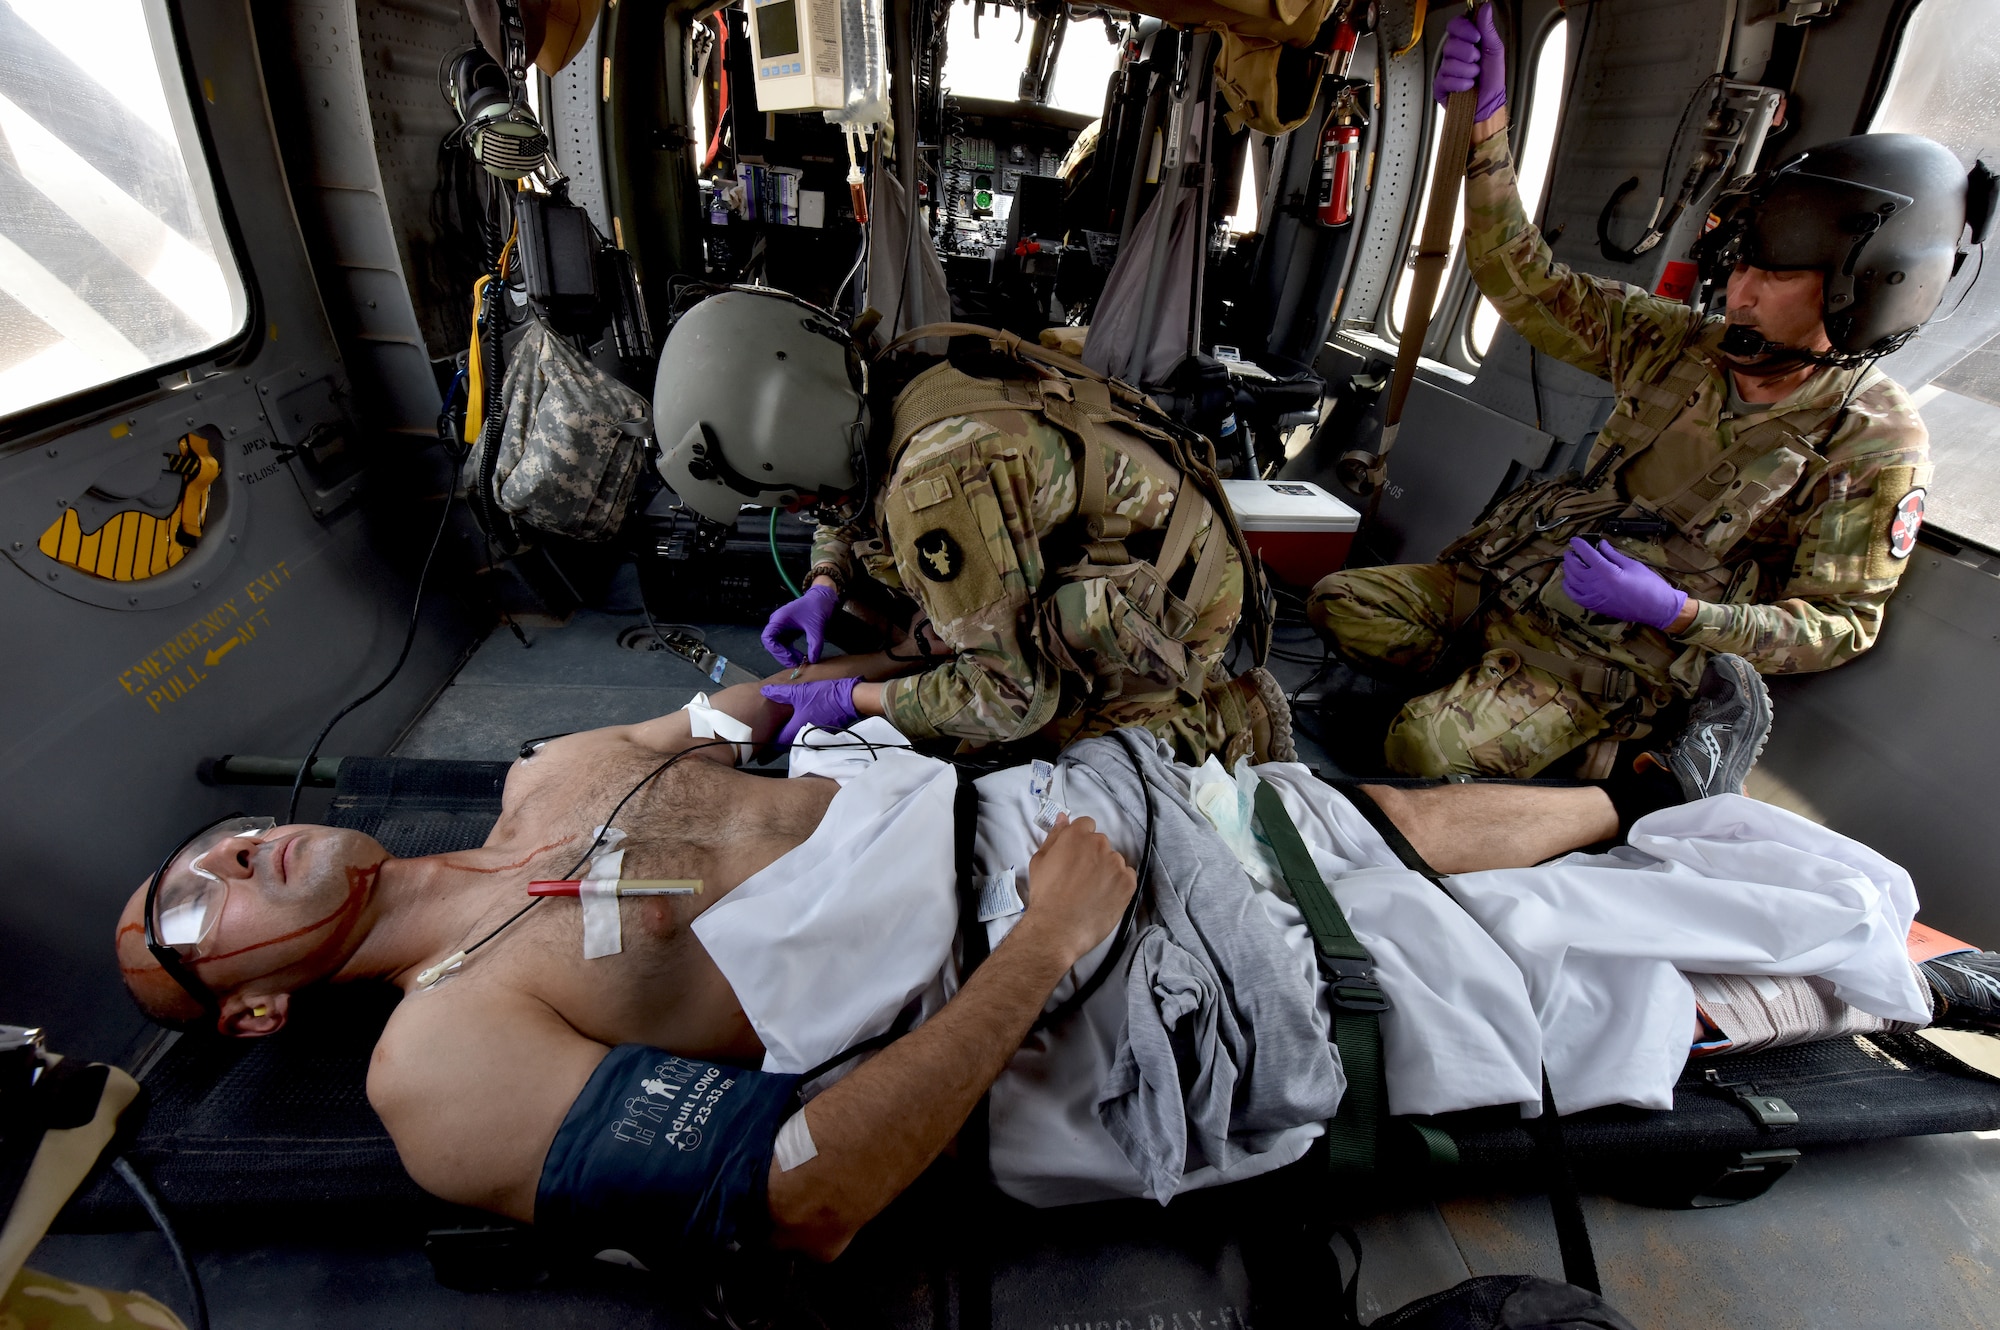 The 378th Expeditionary Medical Squadron conducted a trauma response exercise to practice its response, mitigation, treatment and evacuation of critically injured patients at Prince Sultan Air Base, Kingdom of Saudi Arabia, July 14, 2020. The 378th EMEDS combined with Security Forces, Civil Engineering and U.S. Army flight medics from Task Force Javelin to exercise treatment, evacuation and transport of patients. (U.S. Air Force photo by Master Sgt. Benjamin Wiseman)